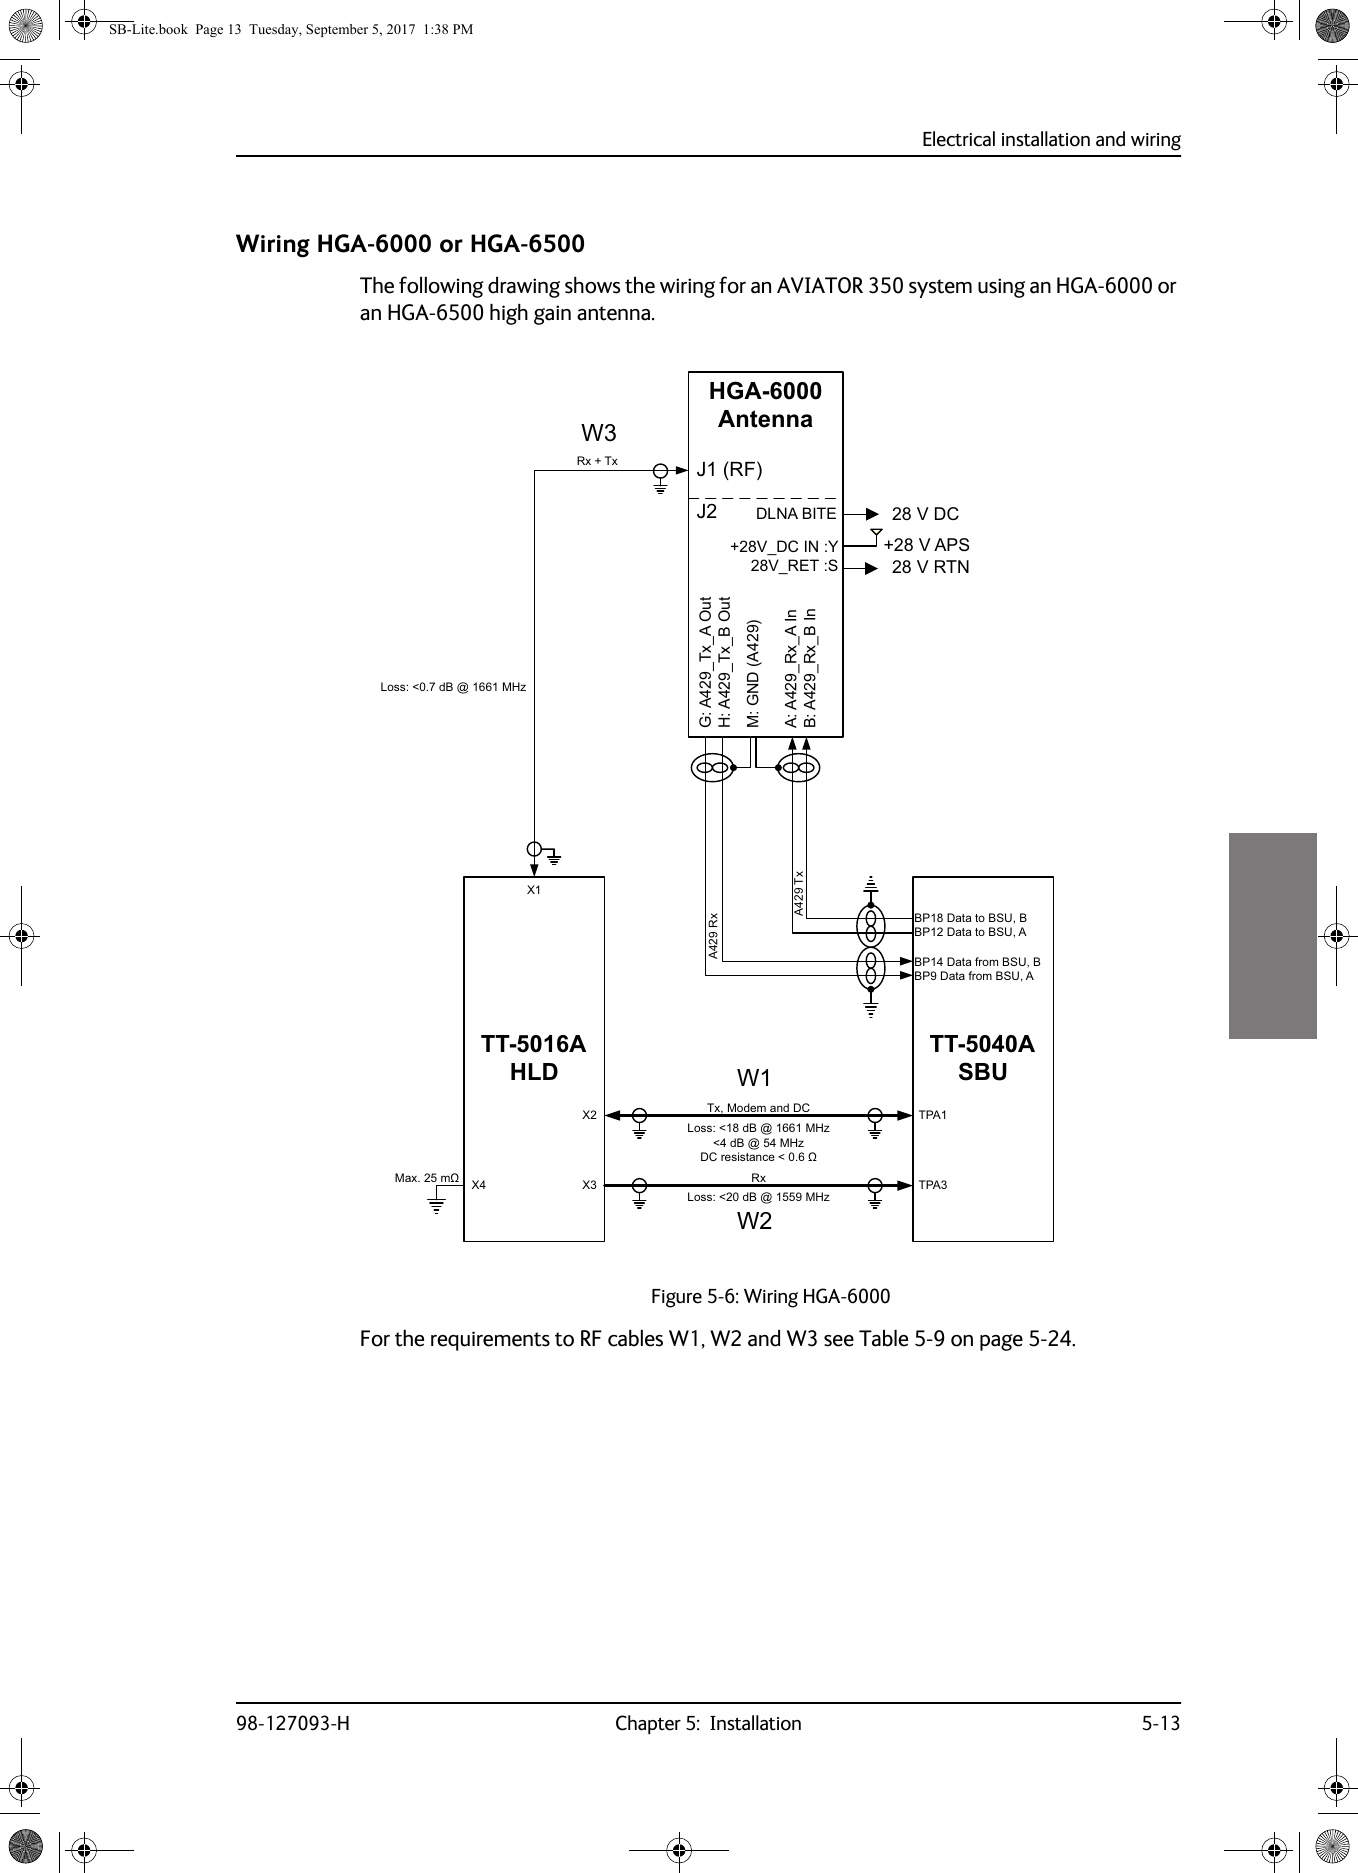 Electrical installation and wiring98-127093-H Chapter 5:  Installation 5-135555Wiring HGA-6000 or HGA-6500The following drawing shows the wiring for an AVIATOR 350 system using an HGA-6000 or an HGA-6500 high gain antenna.For the requirements to RF cables W1, W2 and W3 see Table  5-9 on page  5-24.Figure 5-6: Wiring HGA-6000/RVVG%#0+]G%#0+]&apos;&amp;UHVLVWDQFHȍ:::77$+/&apos;+*$$QWHQQD;77$6%8$7[$5[73$73$;;7[0RGHPDQG&apos;&amp;5[5[7[-5)9$36*$B7[B$2XW+$B7[B%2XW0*1&apos;$$$B5[B$,Q%$B5[B%,Q9B&apos;&amp;,1&lt;9B5(76-95710D[Pȍ ;/RVVG%#0+]/RVVG%#0+]%3&apos;DWDWR%68%%3&apos;DWDWR%68$%3&apos;DWDIURP%68%%3&apos;DWDIURP%68$9&apos;&amp;&apos;/1$%,7(SB-Lite.book  Page 13  Tuesday, September 5, 2017  1:38 PM